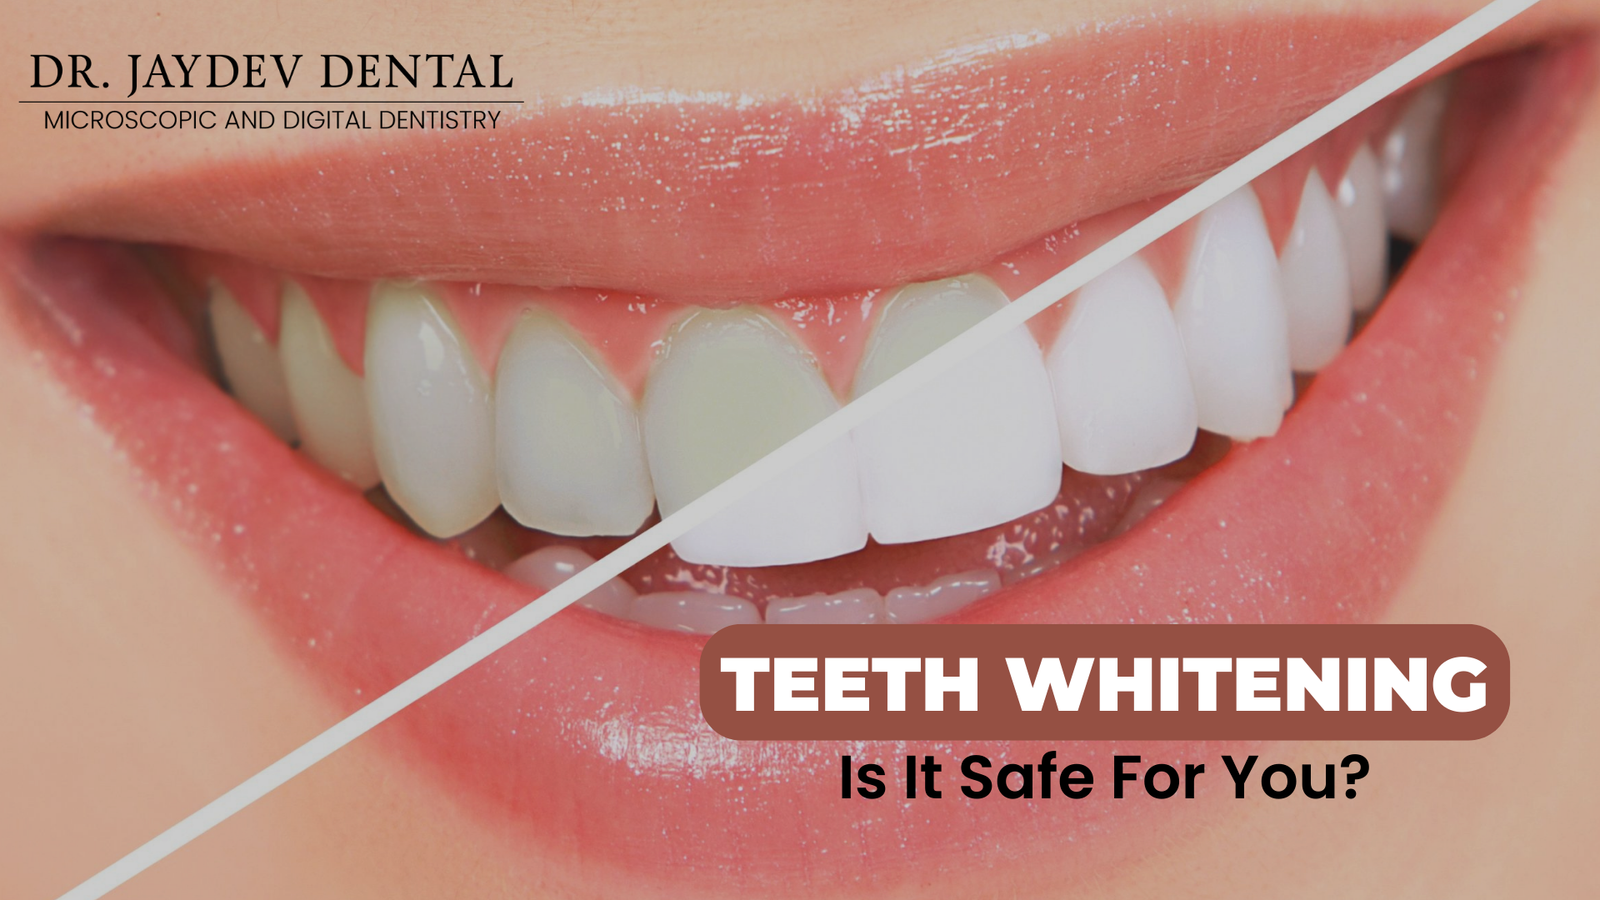 What is Teeth Whitening? - Is it safe for Oral Health